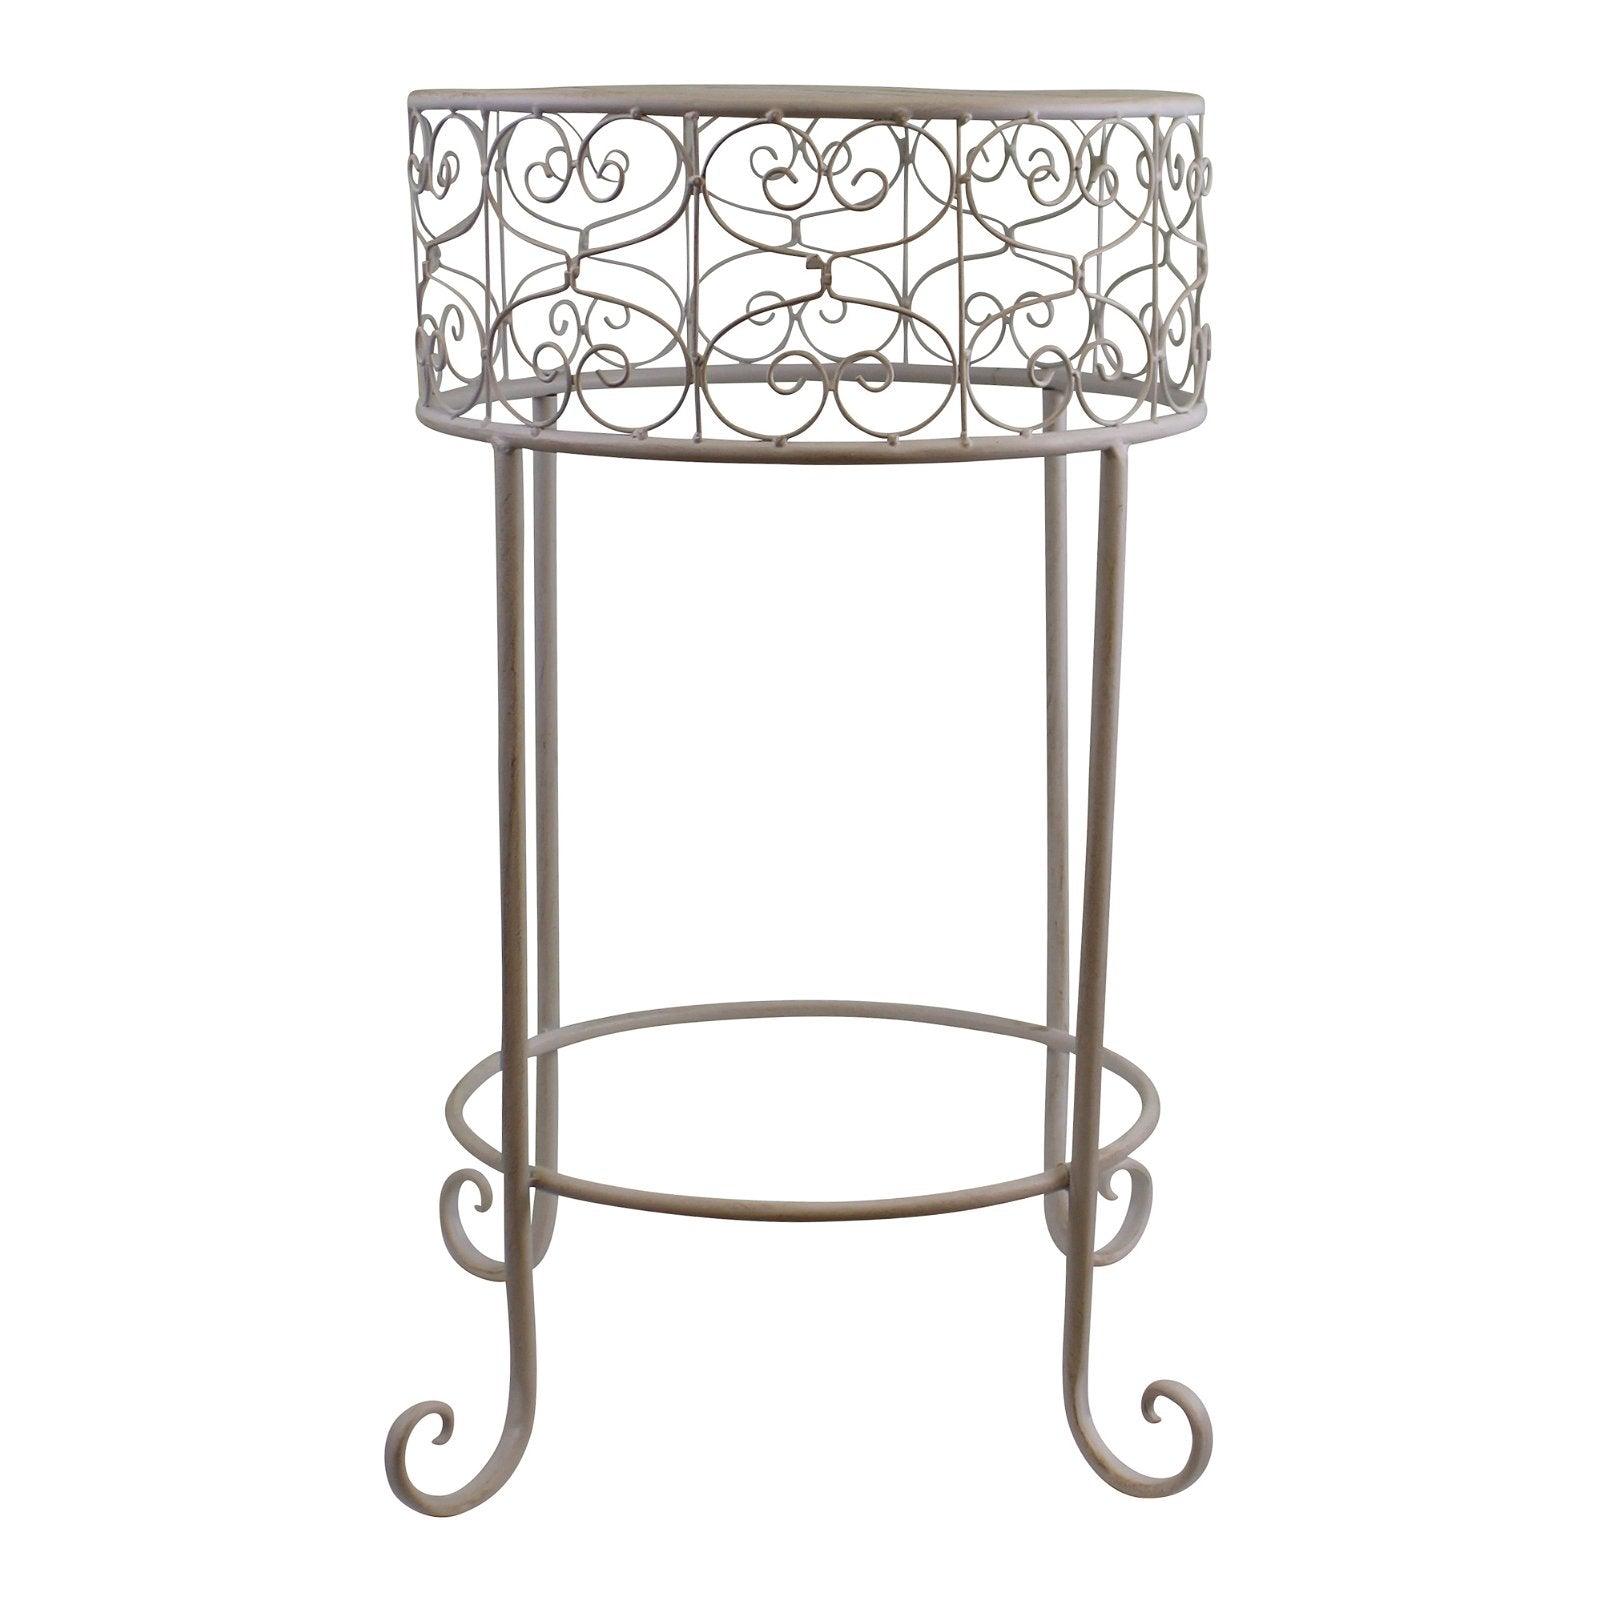 Cream Scroll Metal Plant Stand-Planters, Vases & Plant Stands